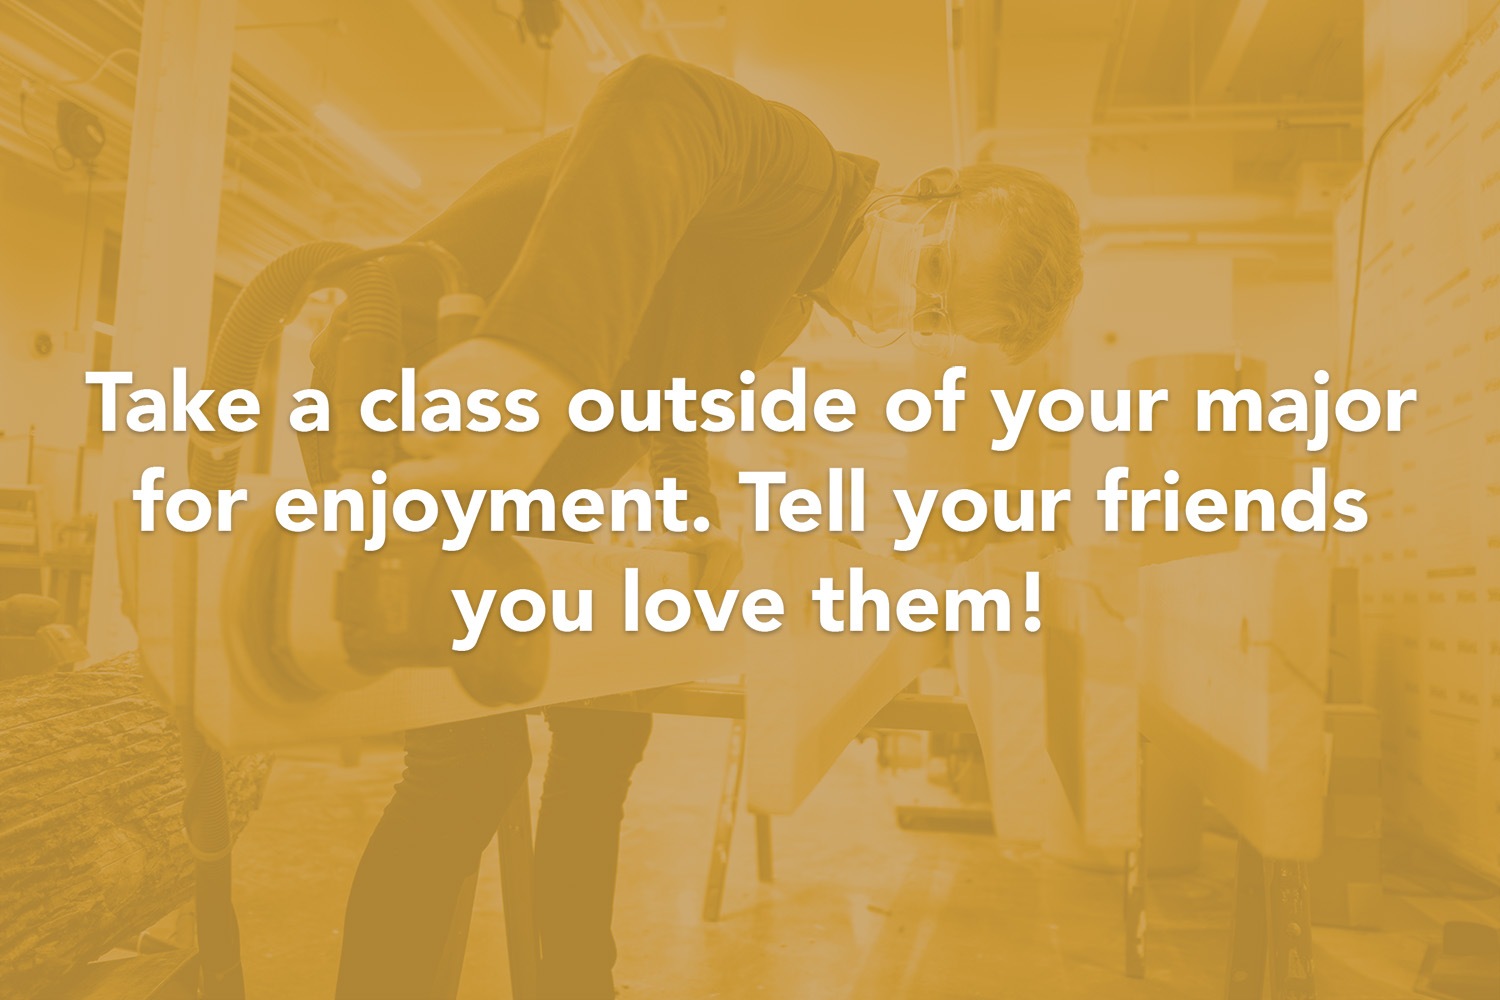 Quote: Take a class outside of your major for enjoyment. Tell you friends you love them!